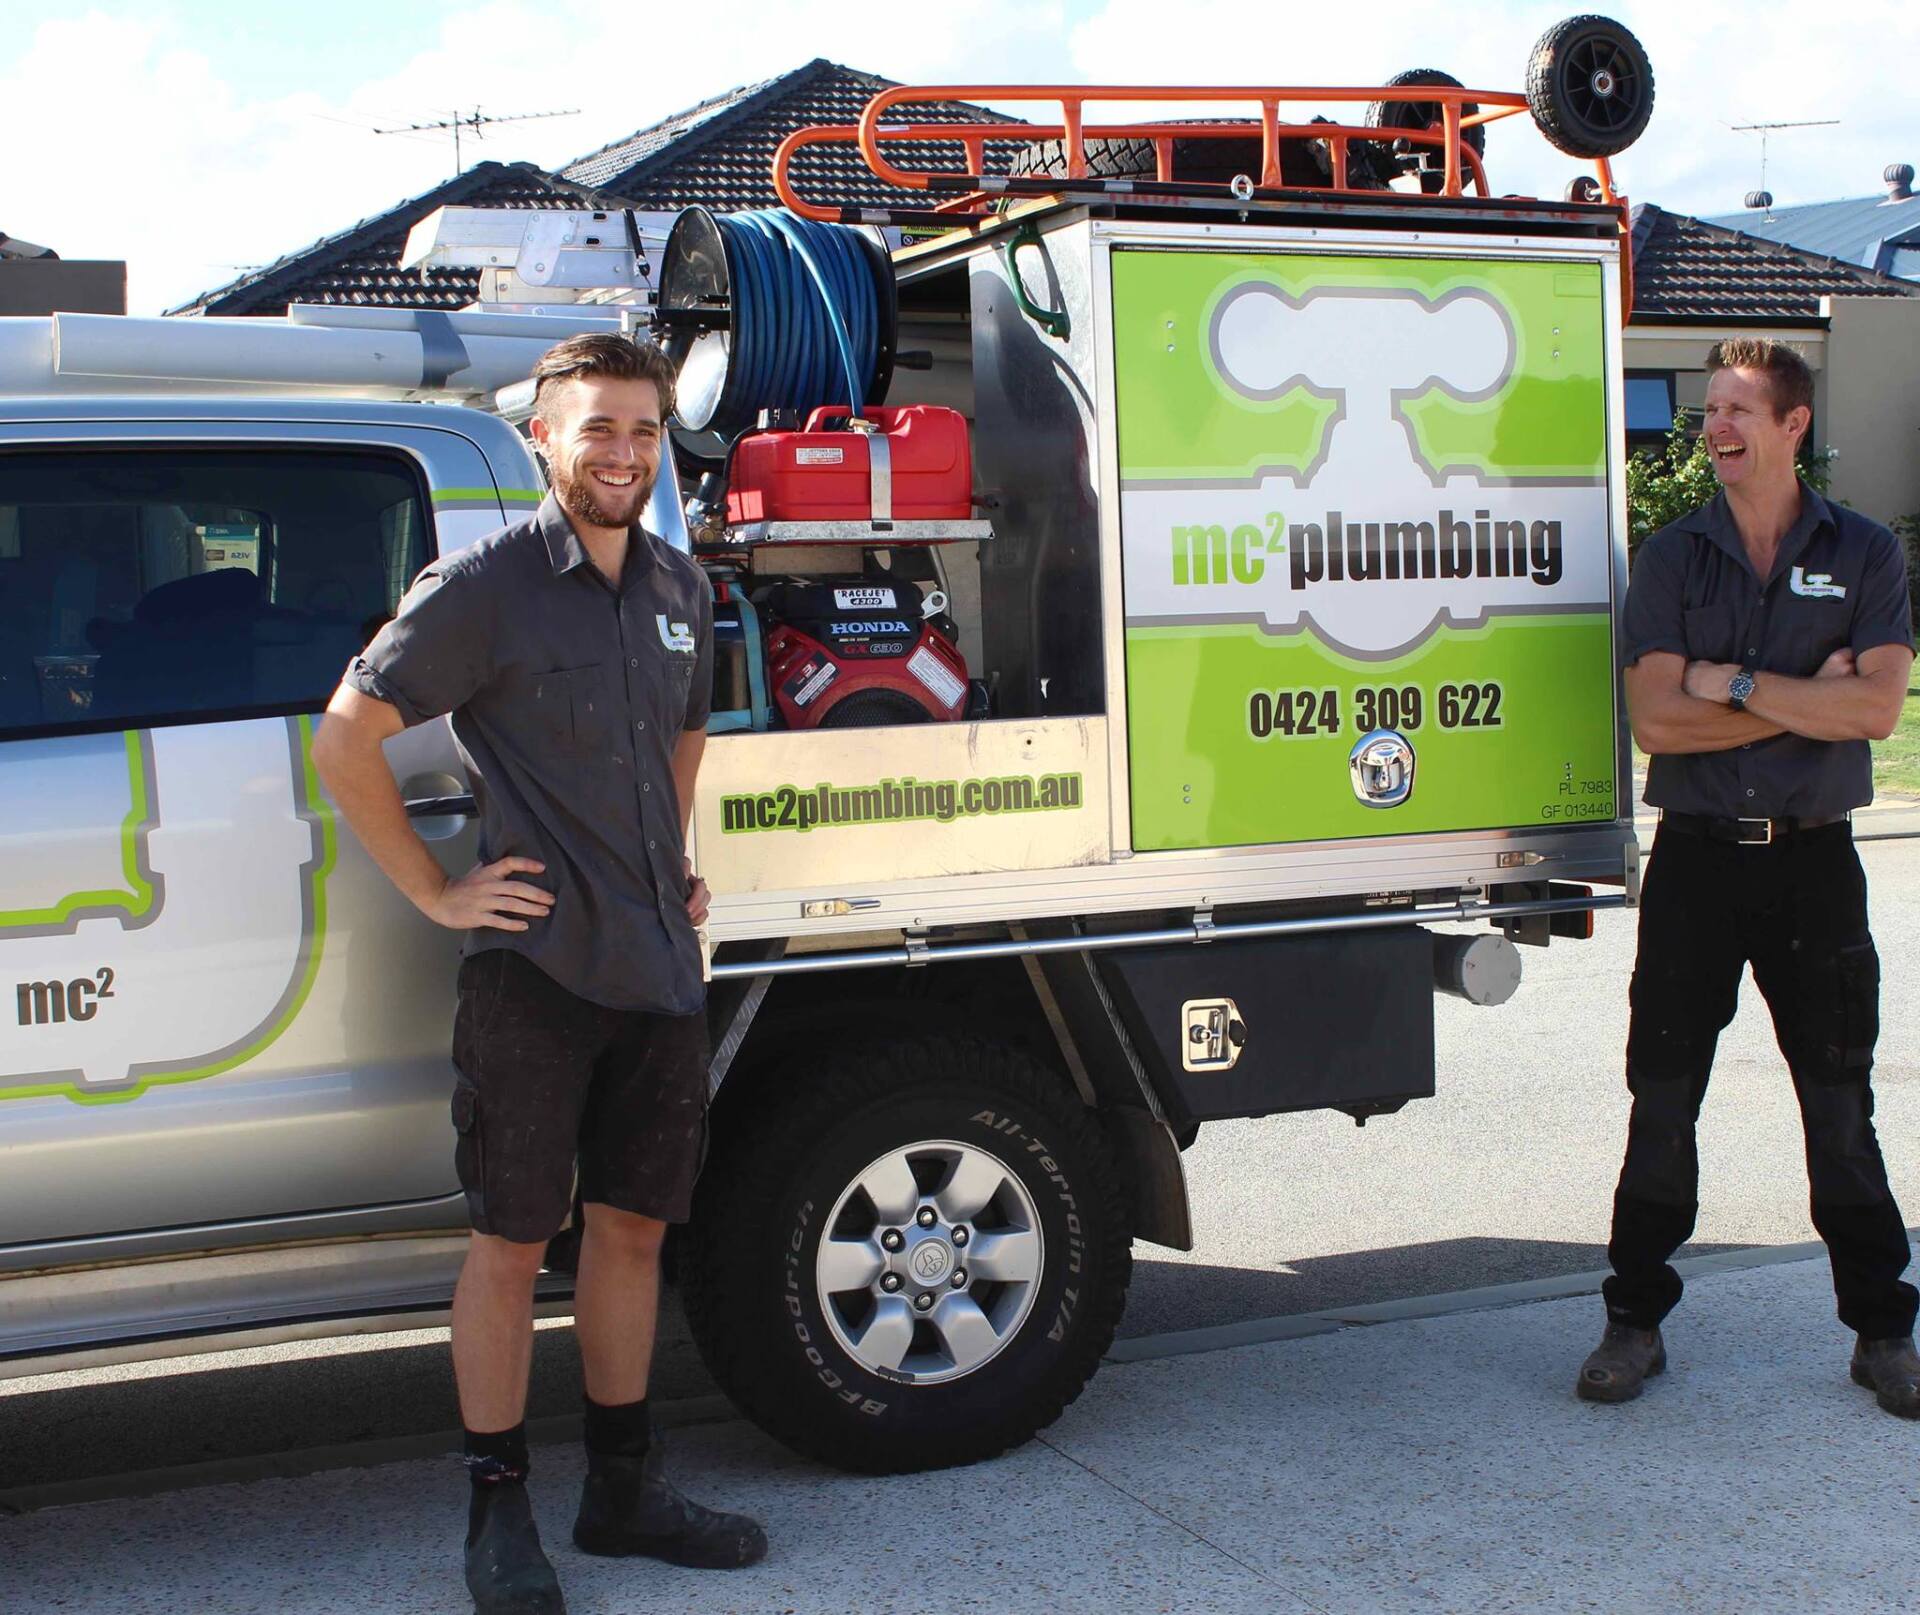 Emergency Plumbers to the rescue with the locals at MC2 plumbing